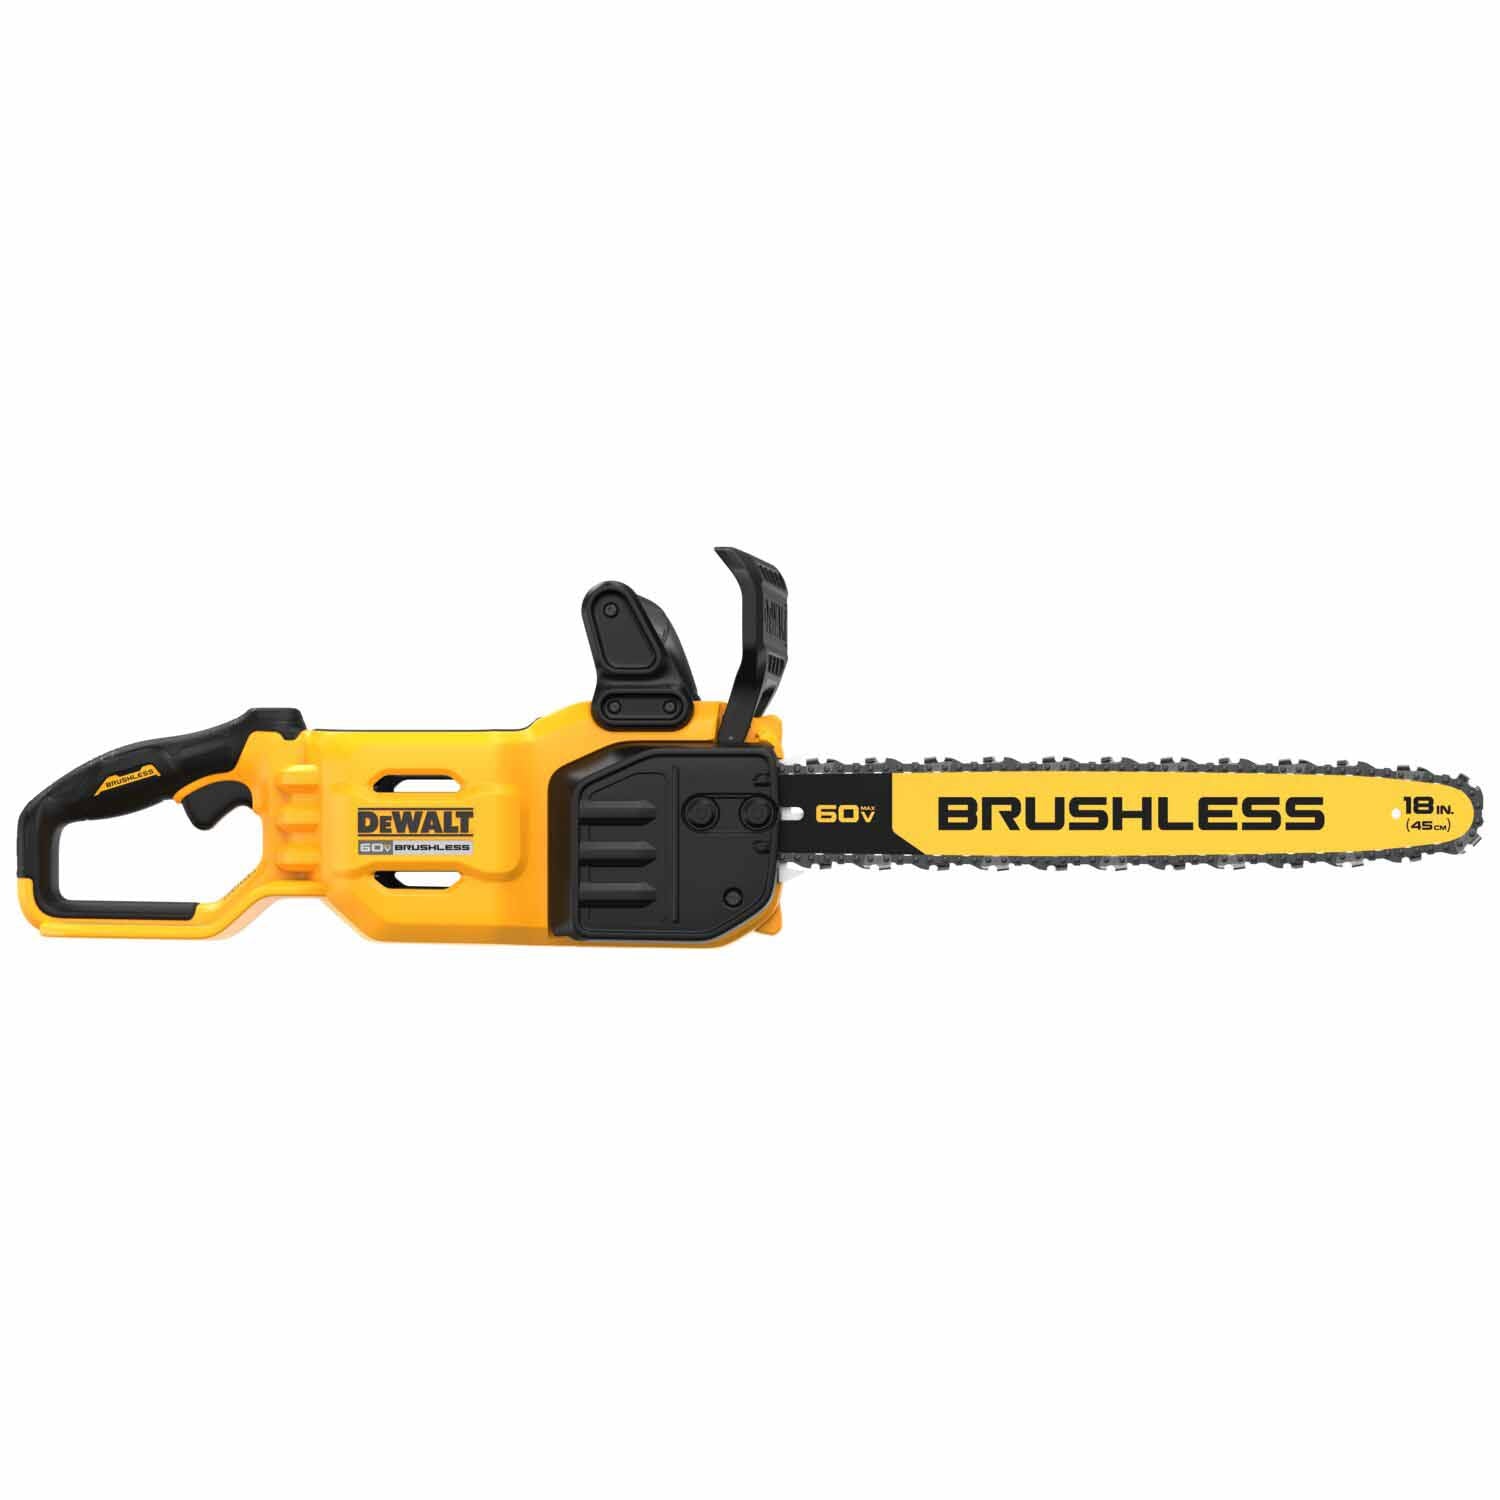 DeWalt DCCS672B 60V MAX* 18" Brushless Cordless Chainsaw, Tool Only